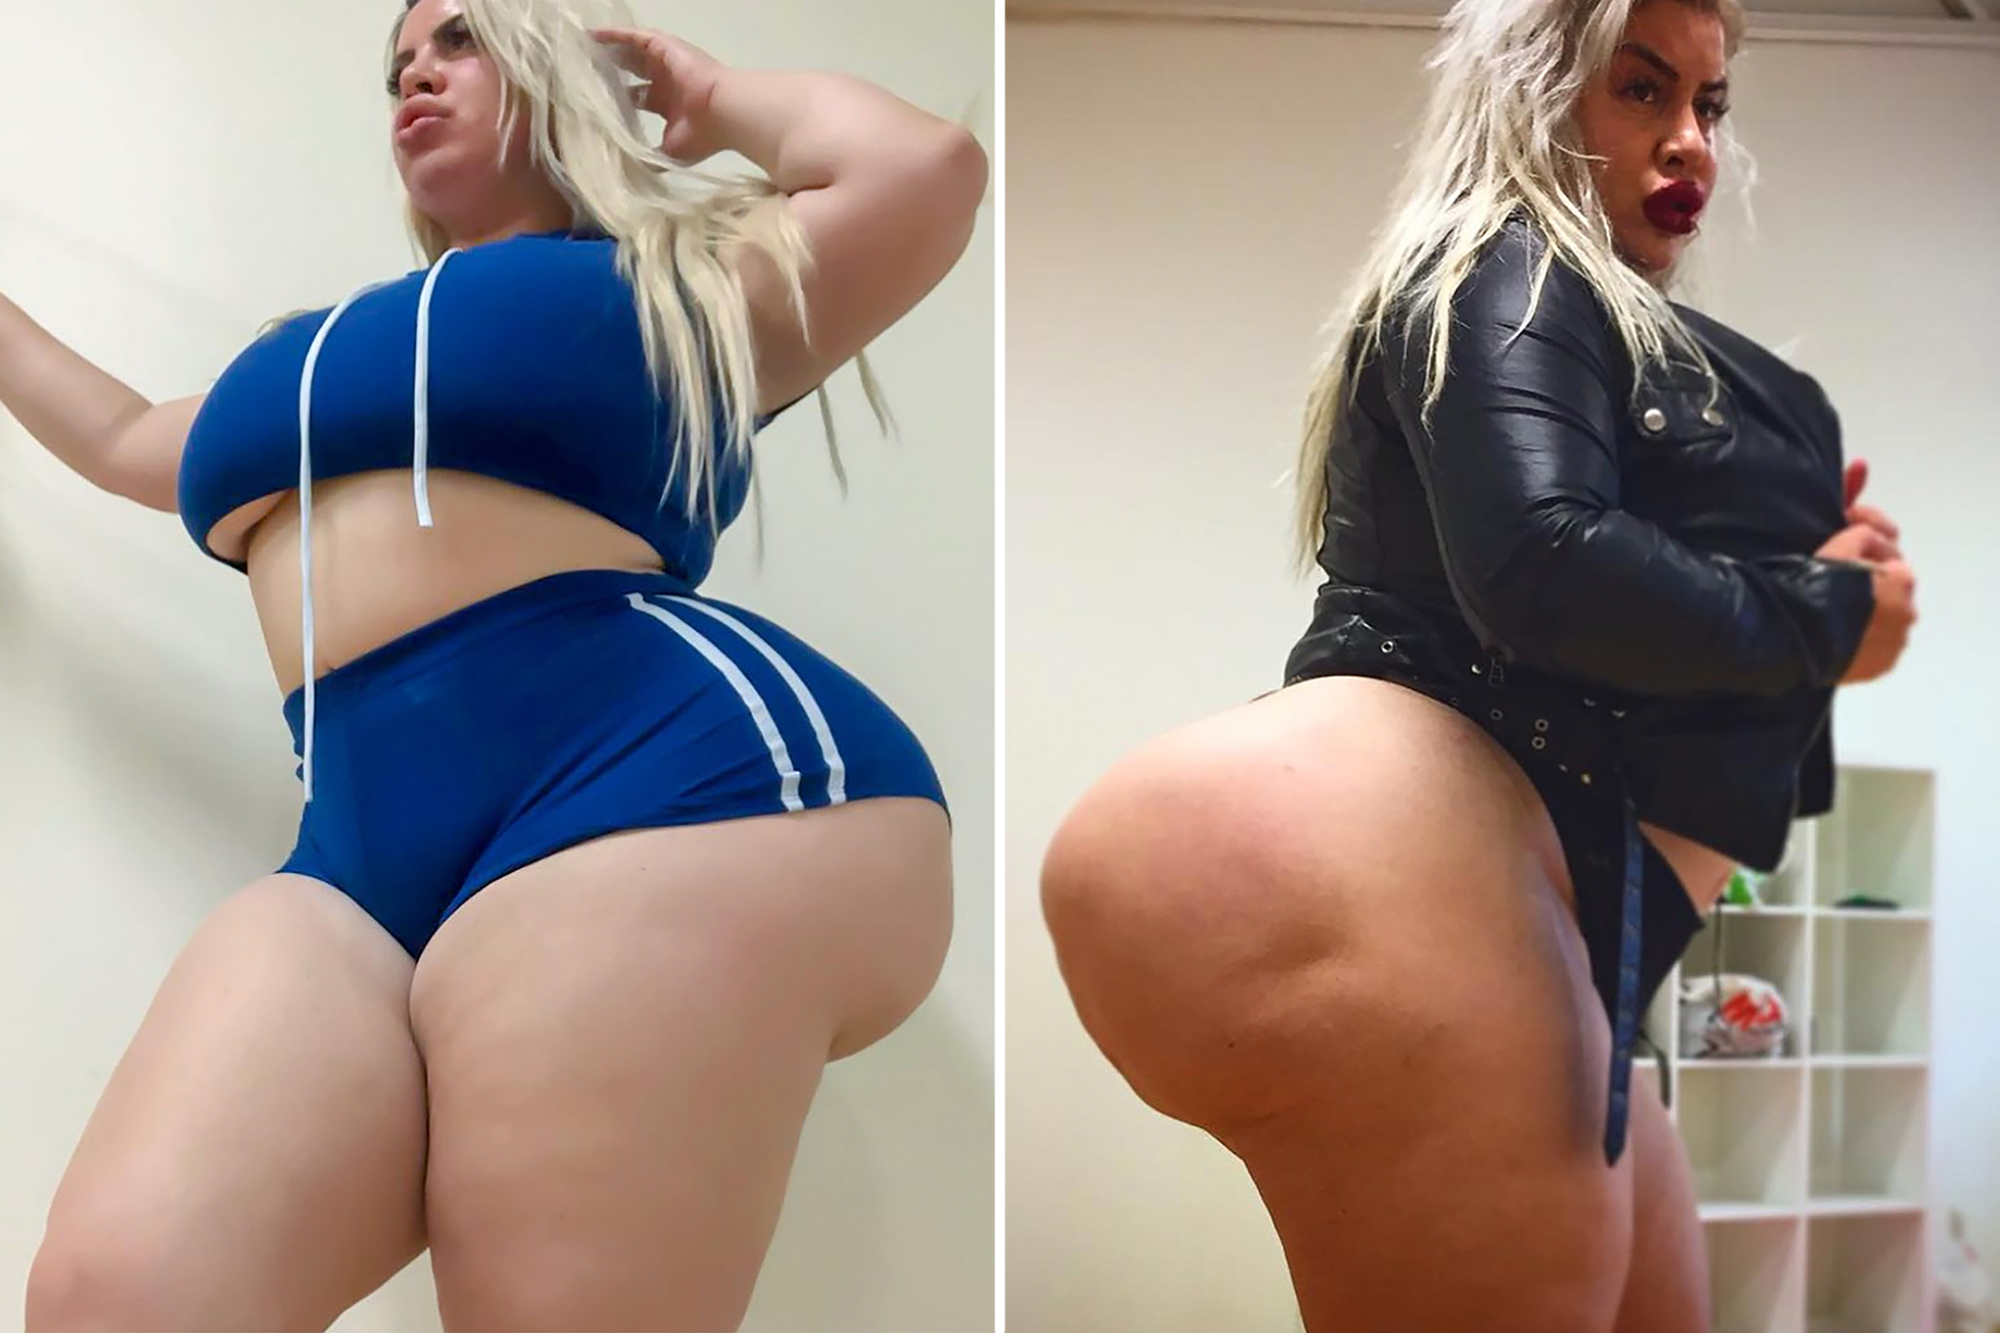 cyndi byrnes recommends big juicy black booties pic